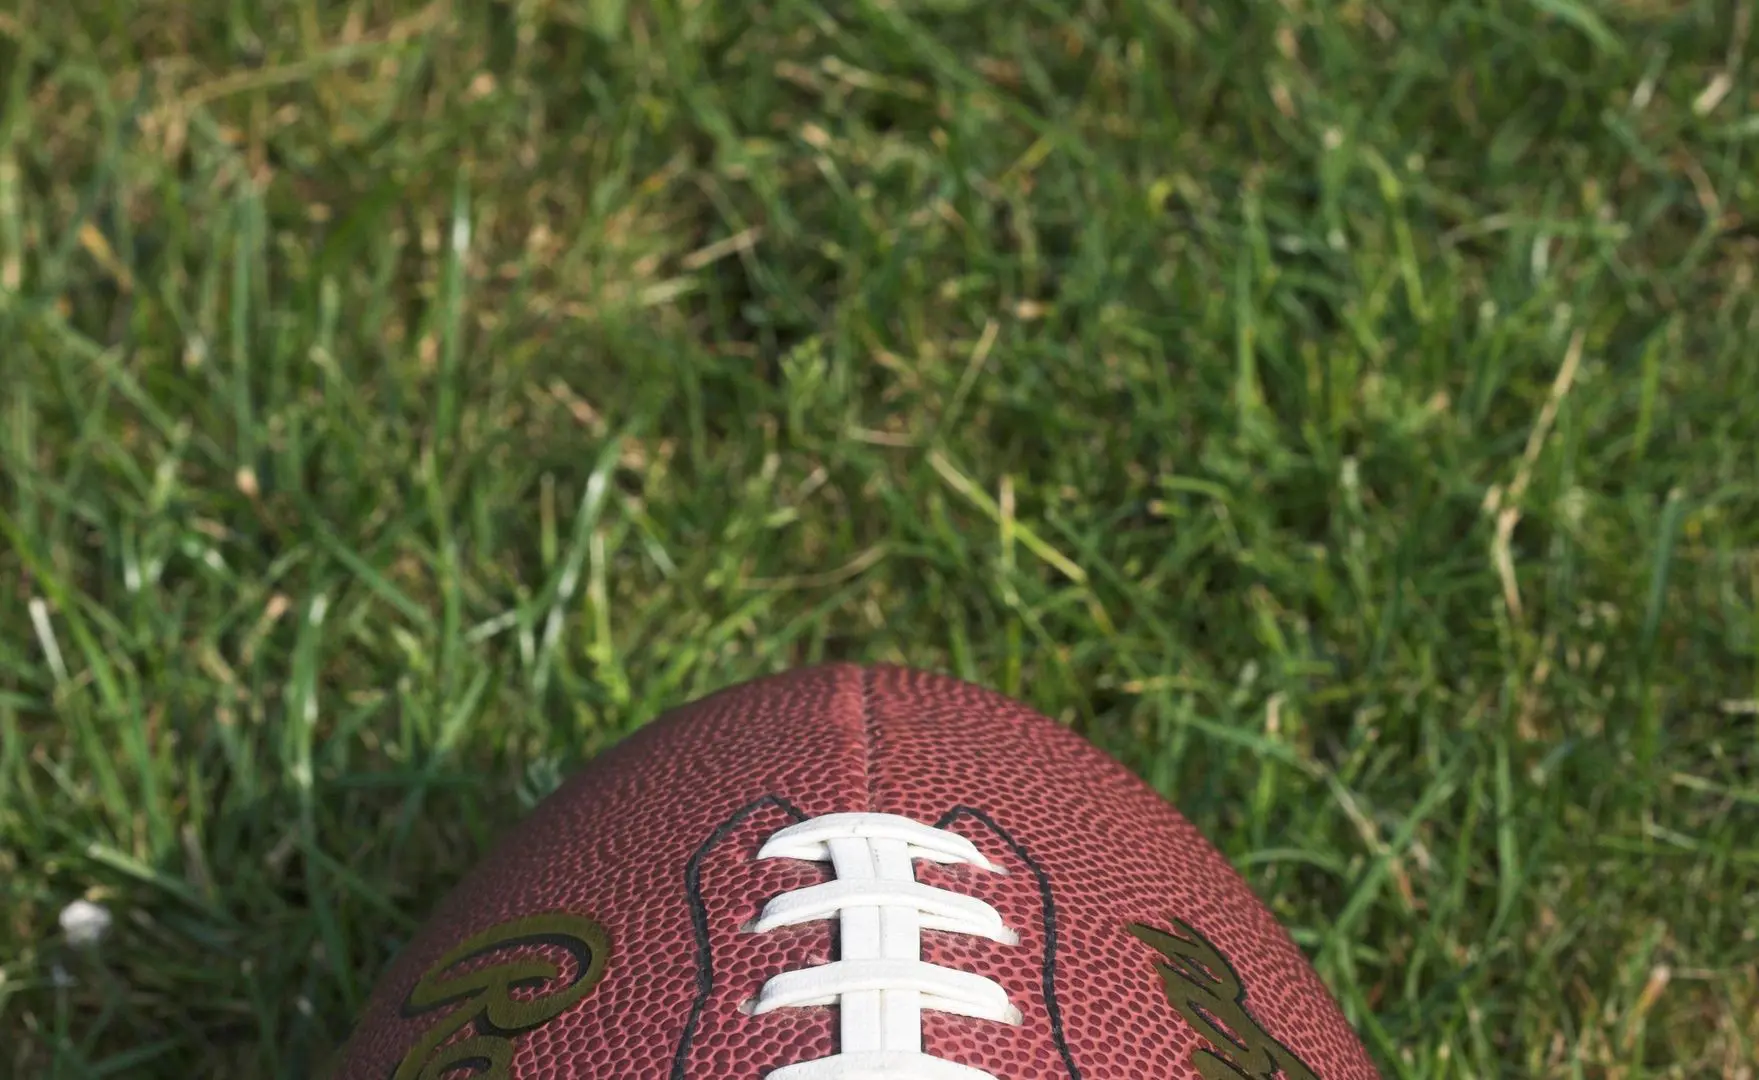 A close up of the laces on a football